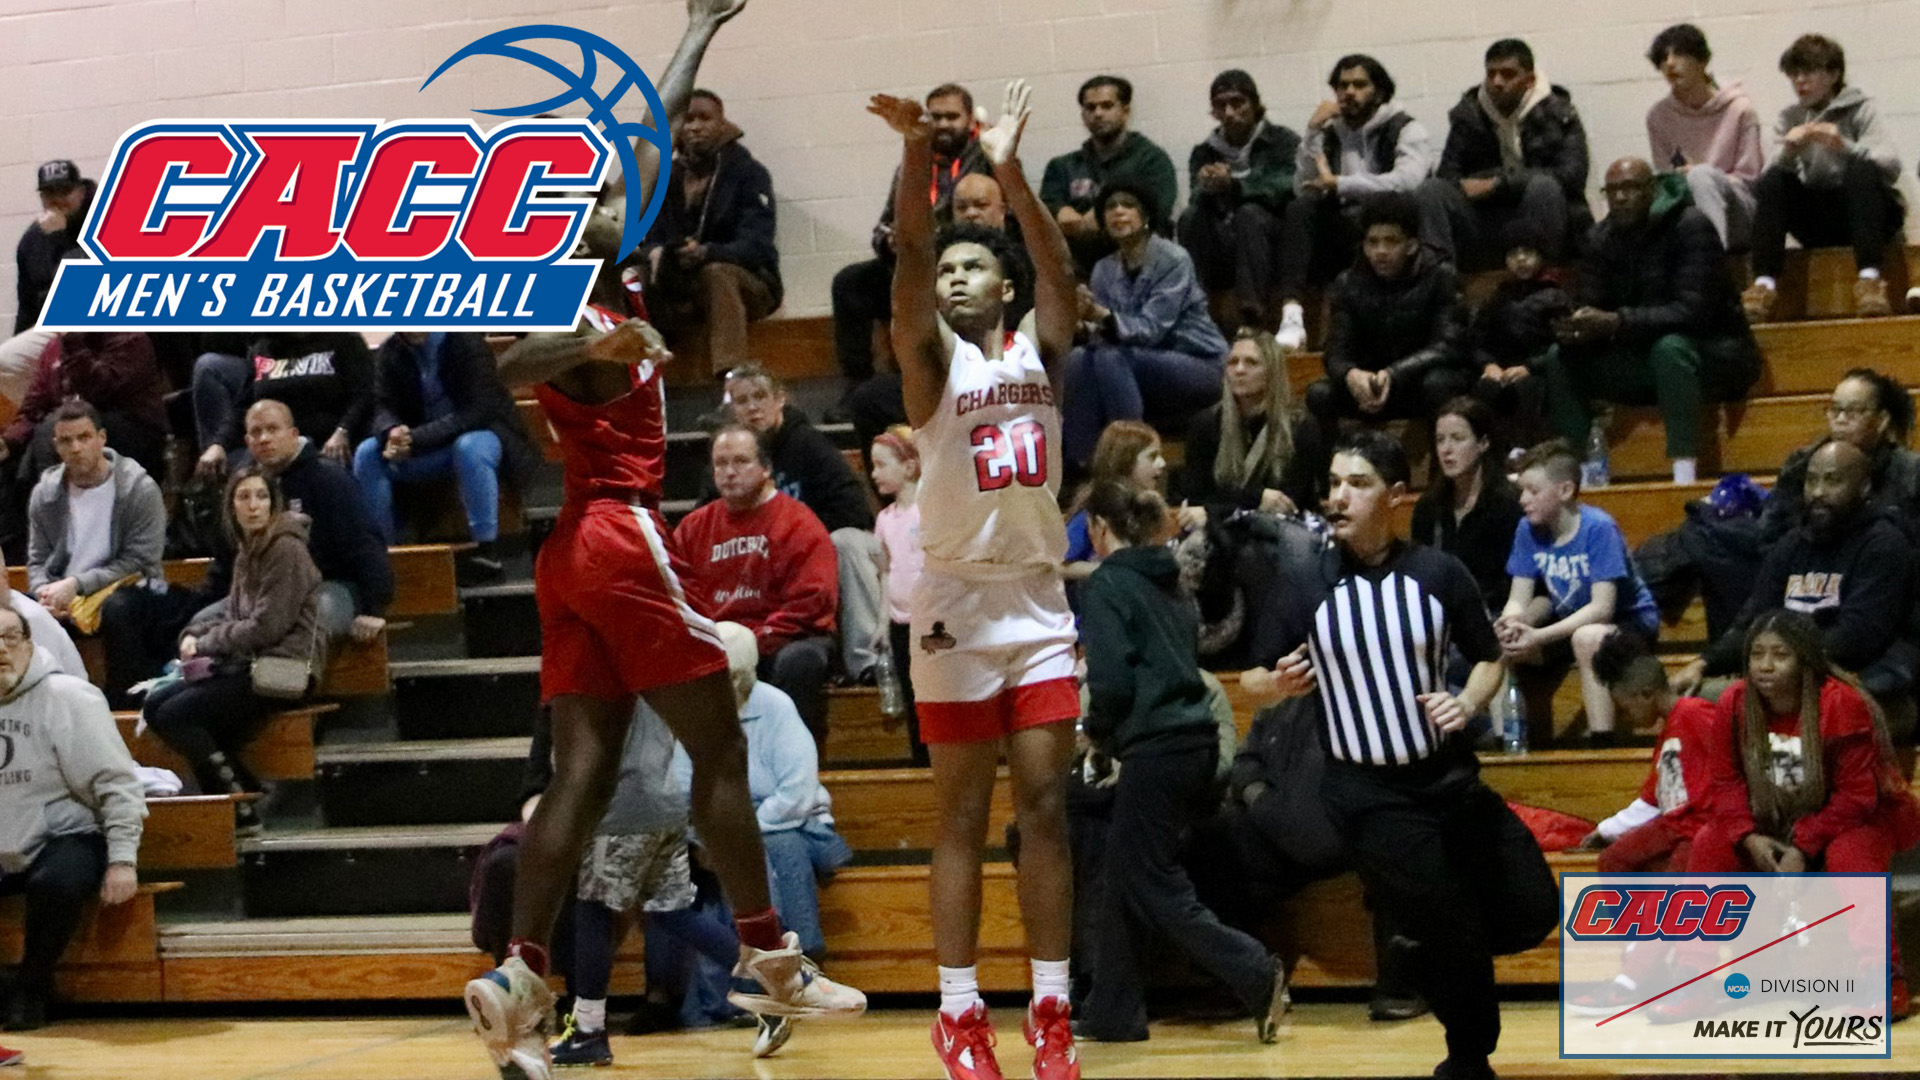 CHERRY NAMED CACC PLAYER AND ROOKIE OF THE WEEK